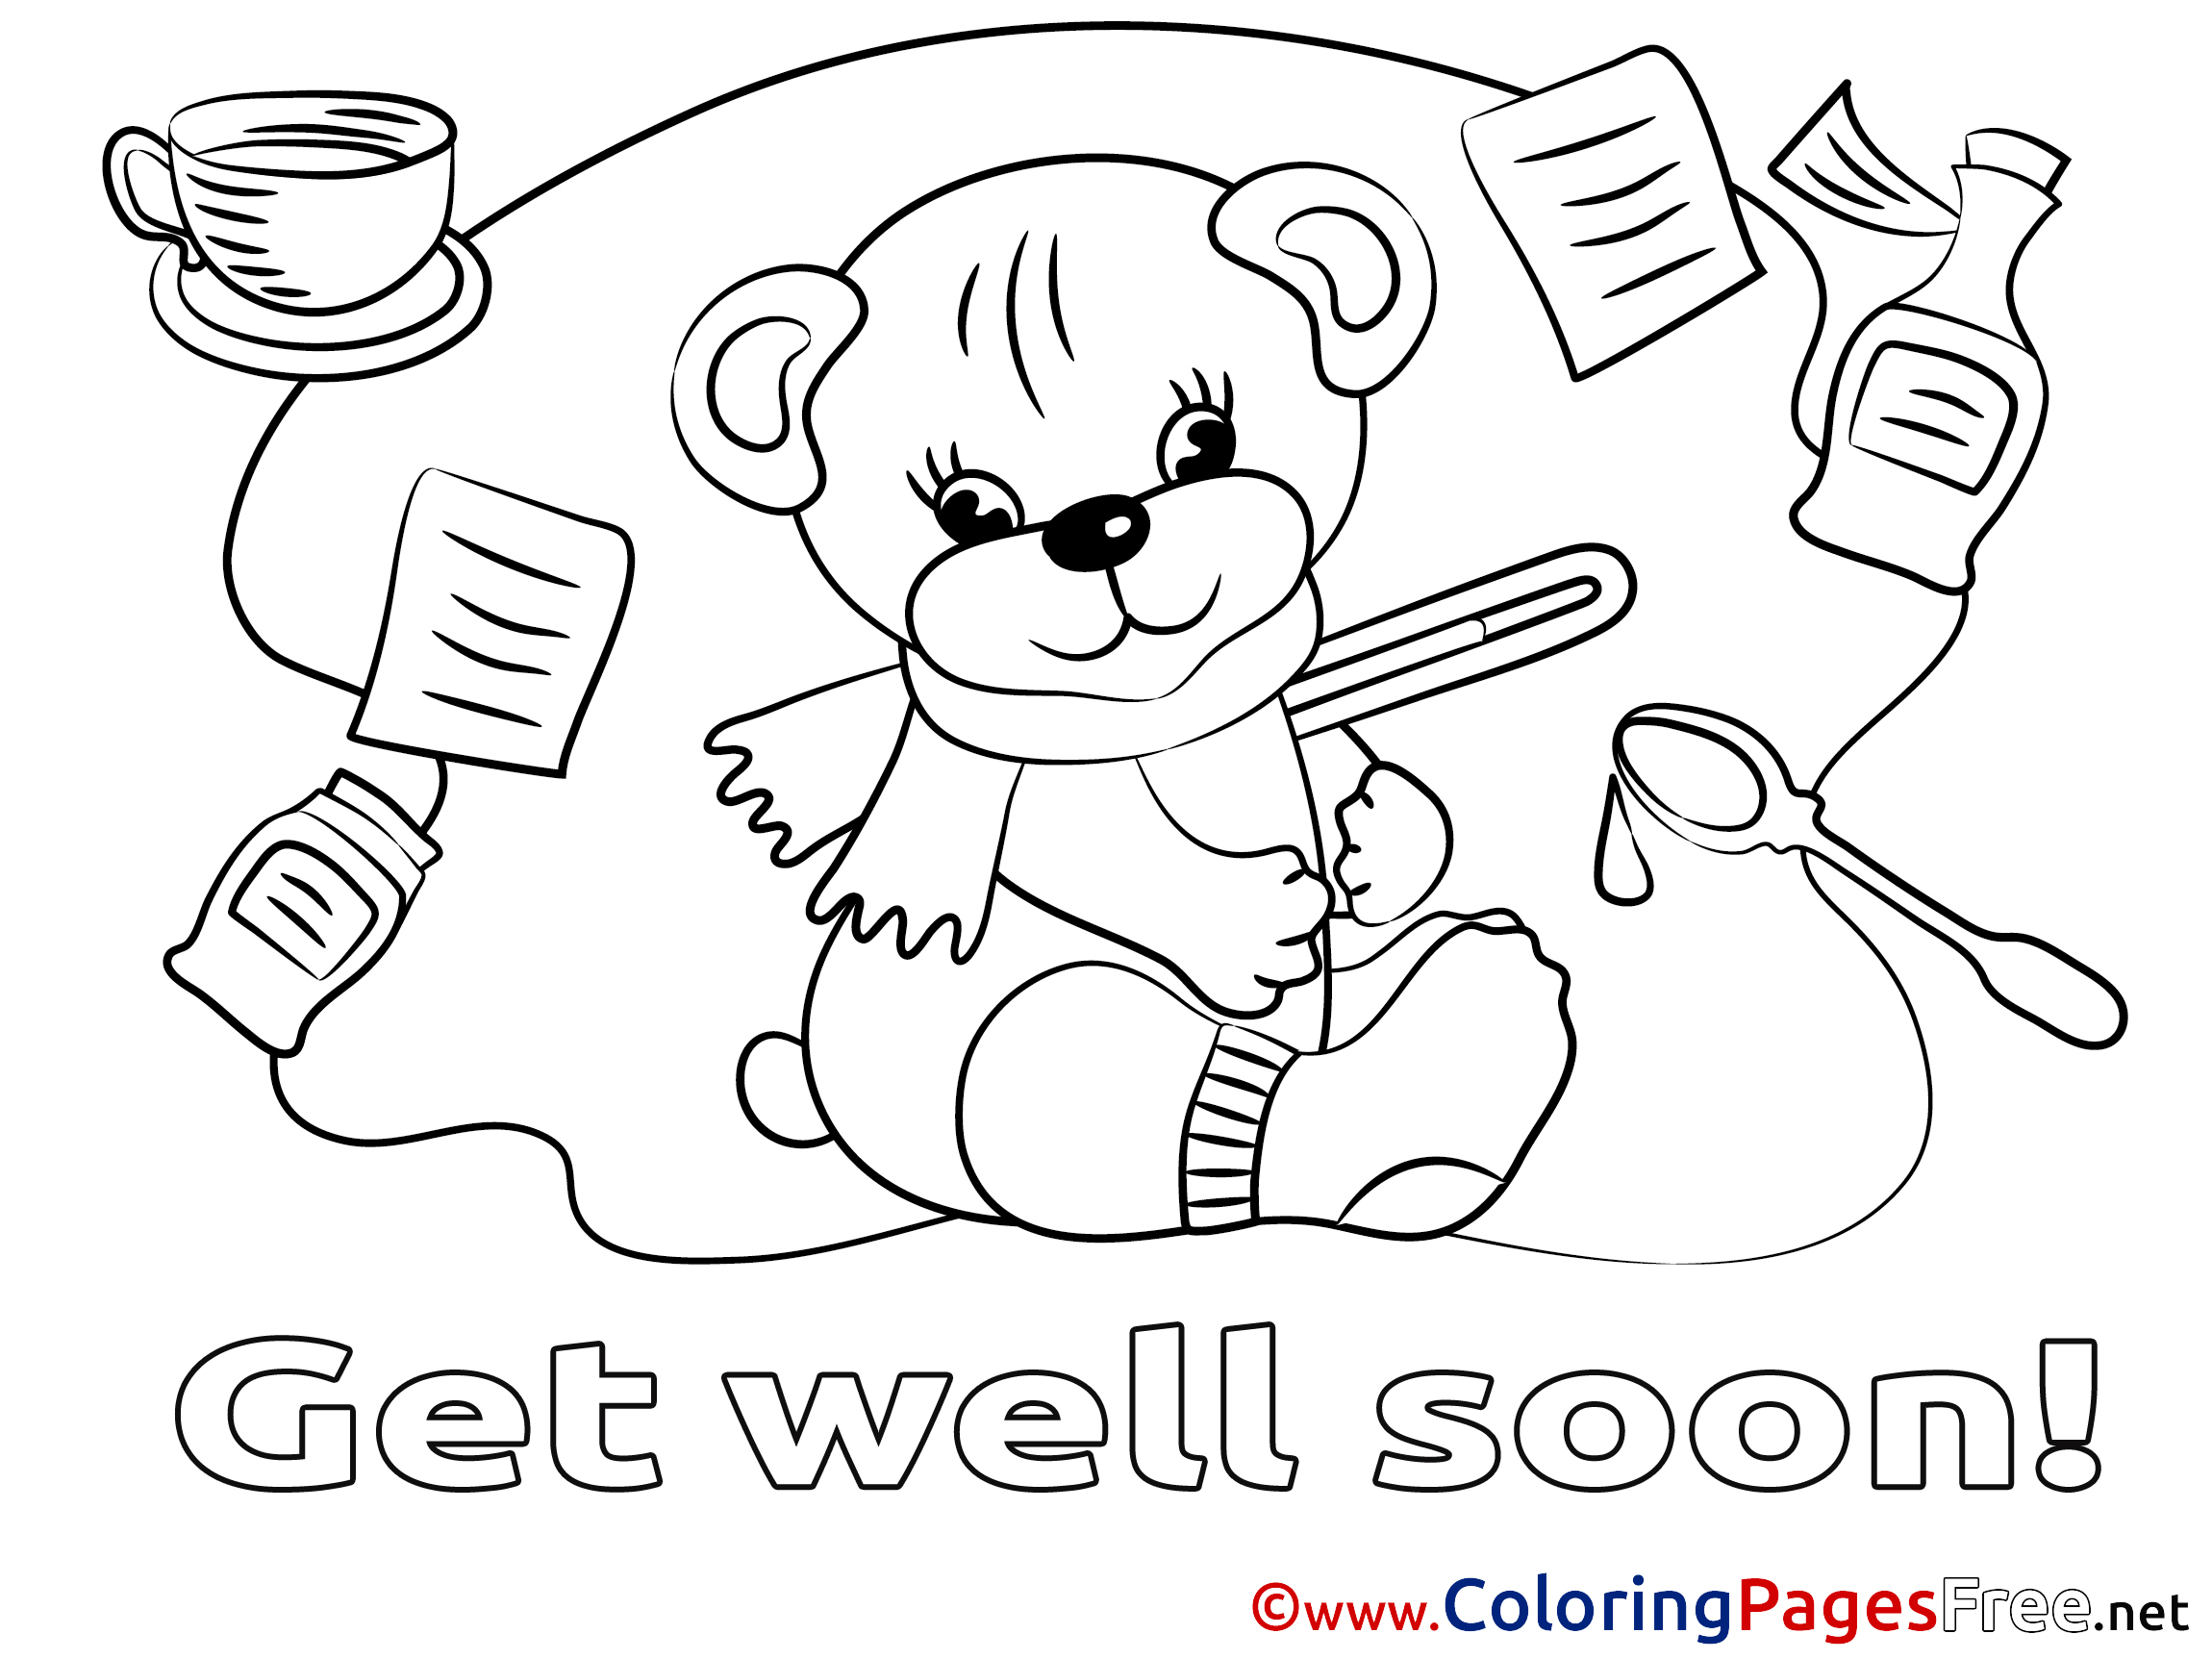 Bear Colouring Page Get well soon